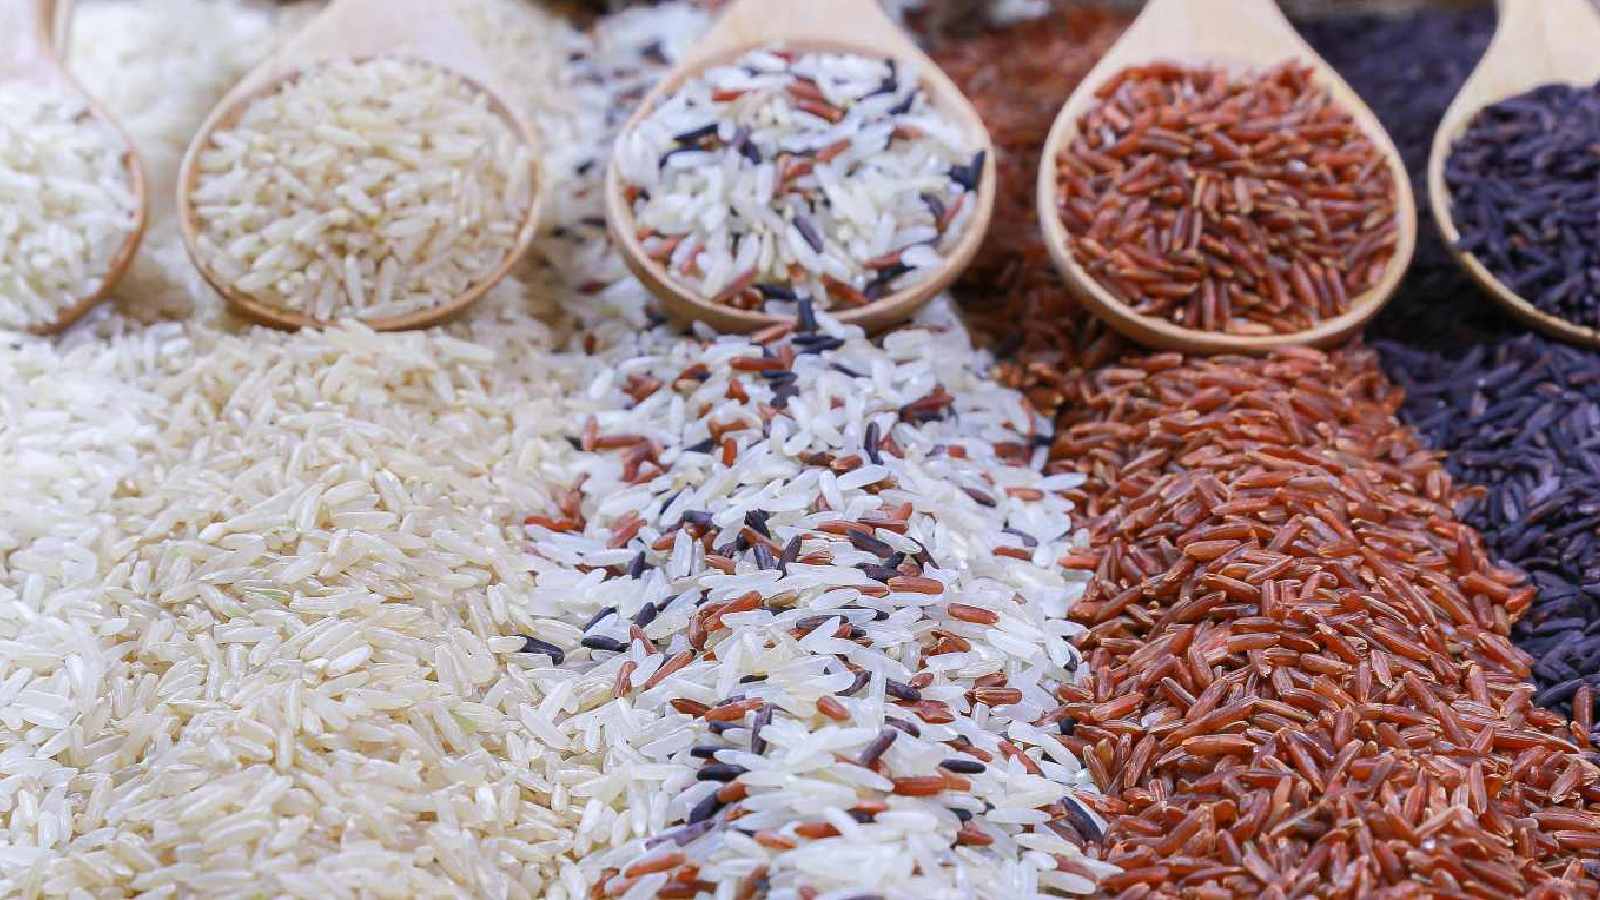 Red vs black vs brown vs white rice: Which one is healthier?